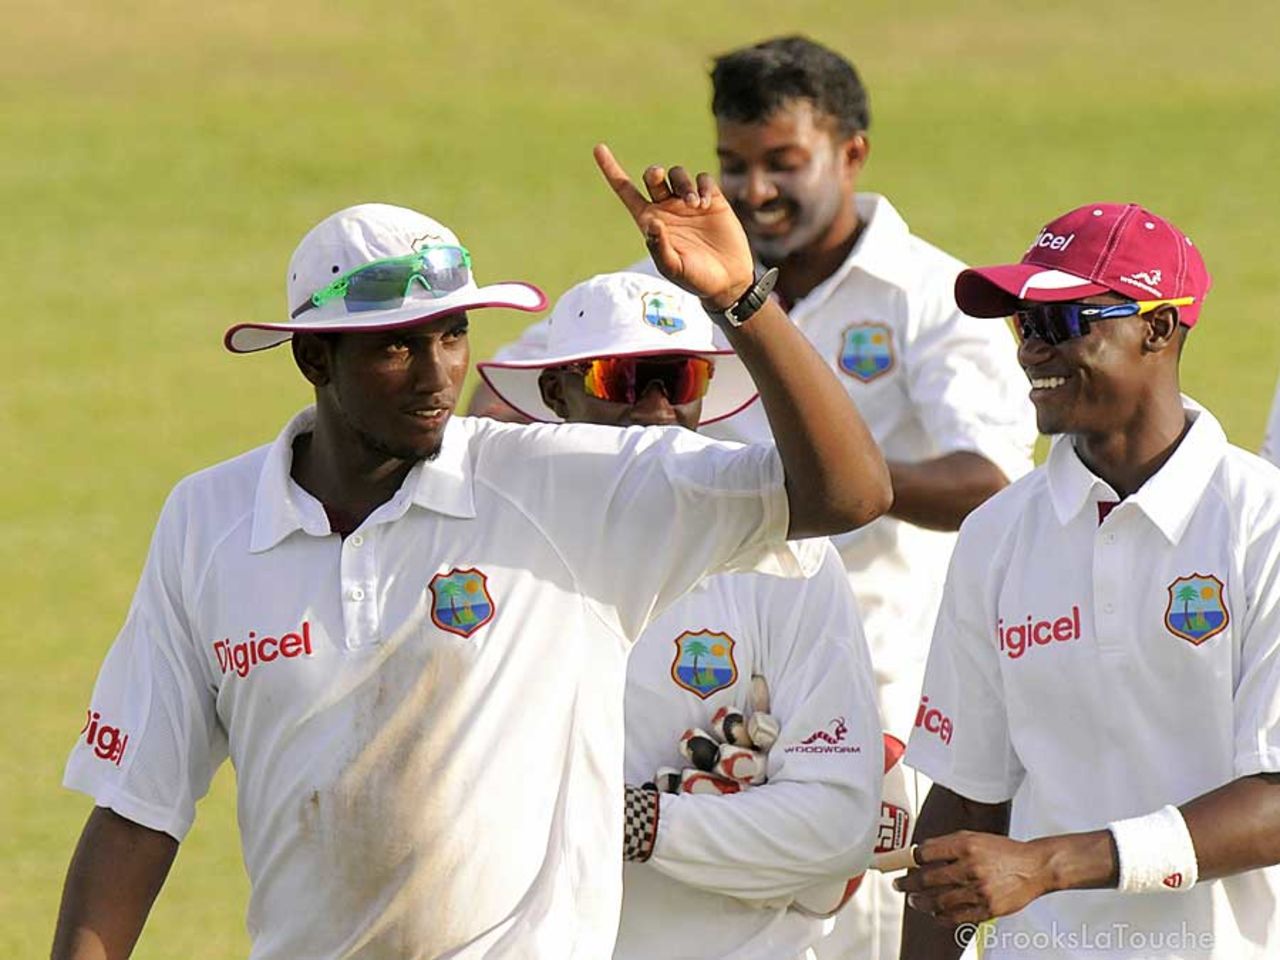 Delorn Johnson leads his team off after picking four wickets, West Indies A v India A, 2nd unofficial Test, St Vincent, 3rd day, June 11, 2012